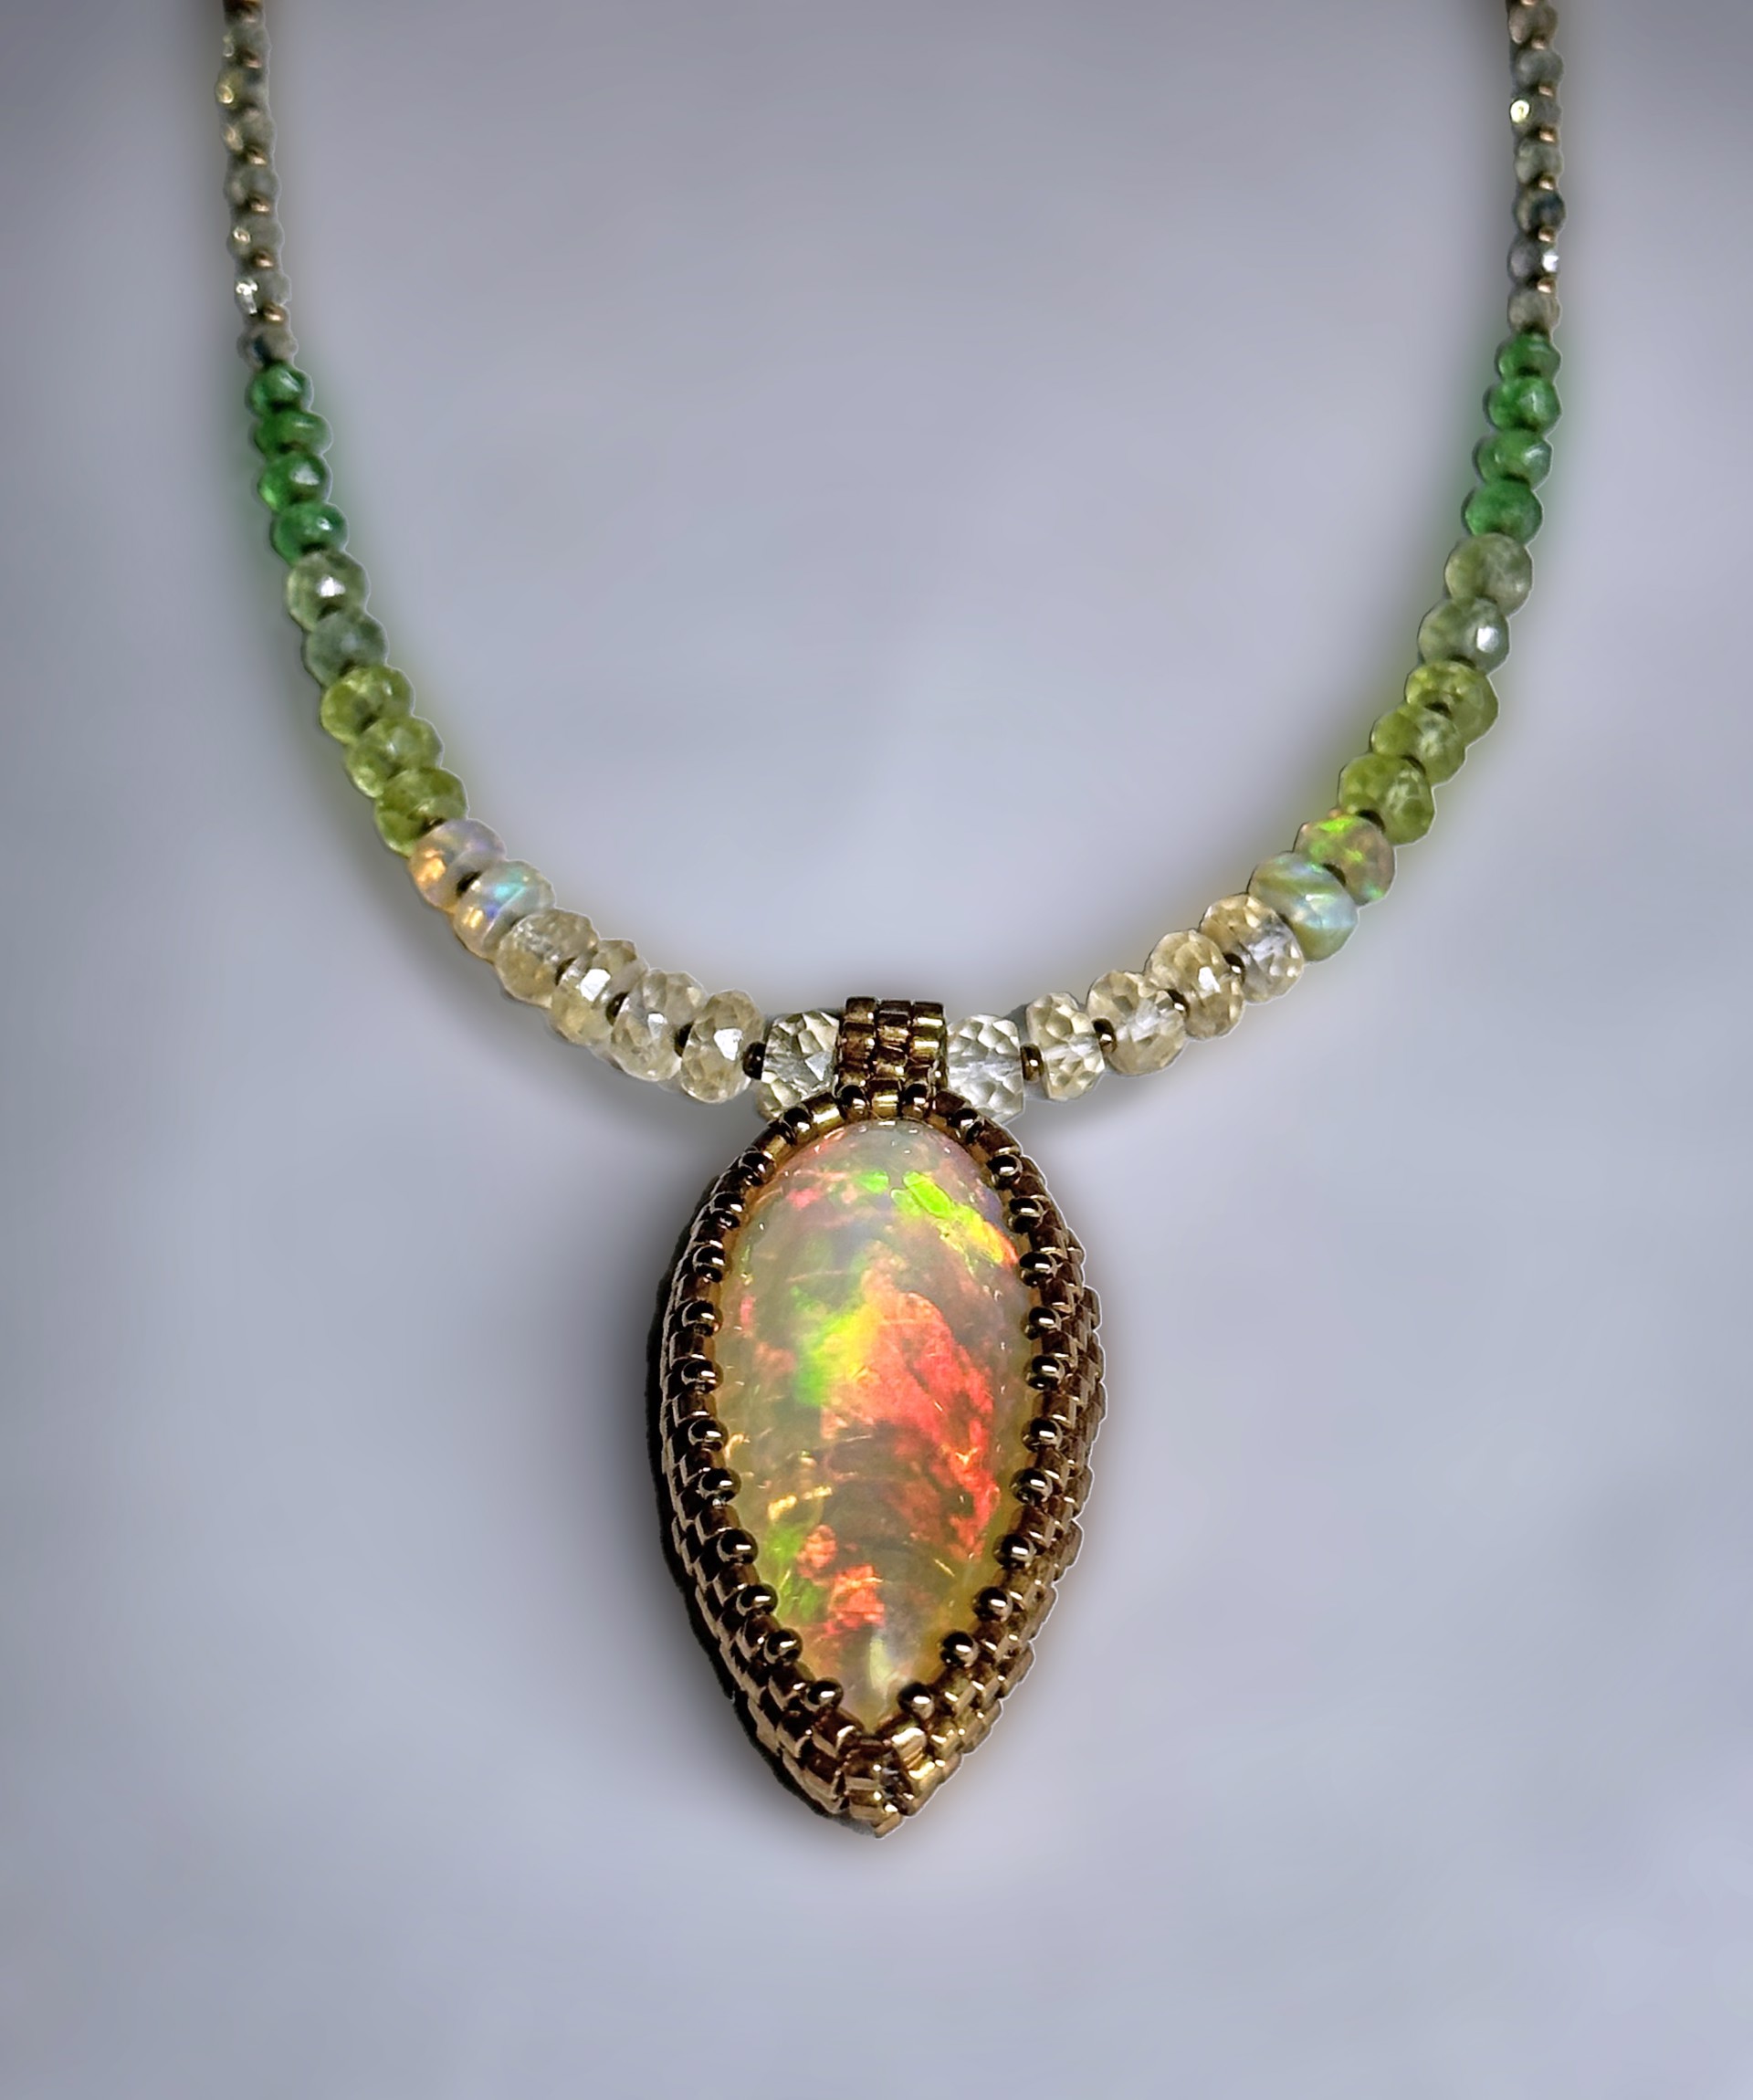 Golden Crystal Ethiopian Opal Necklace with Gemstone Beads by Nina Vidal